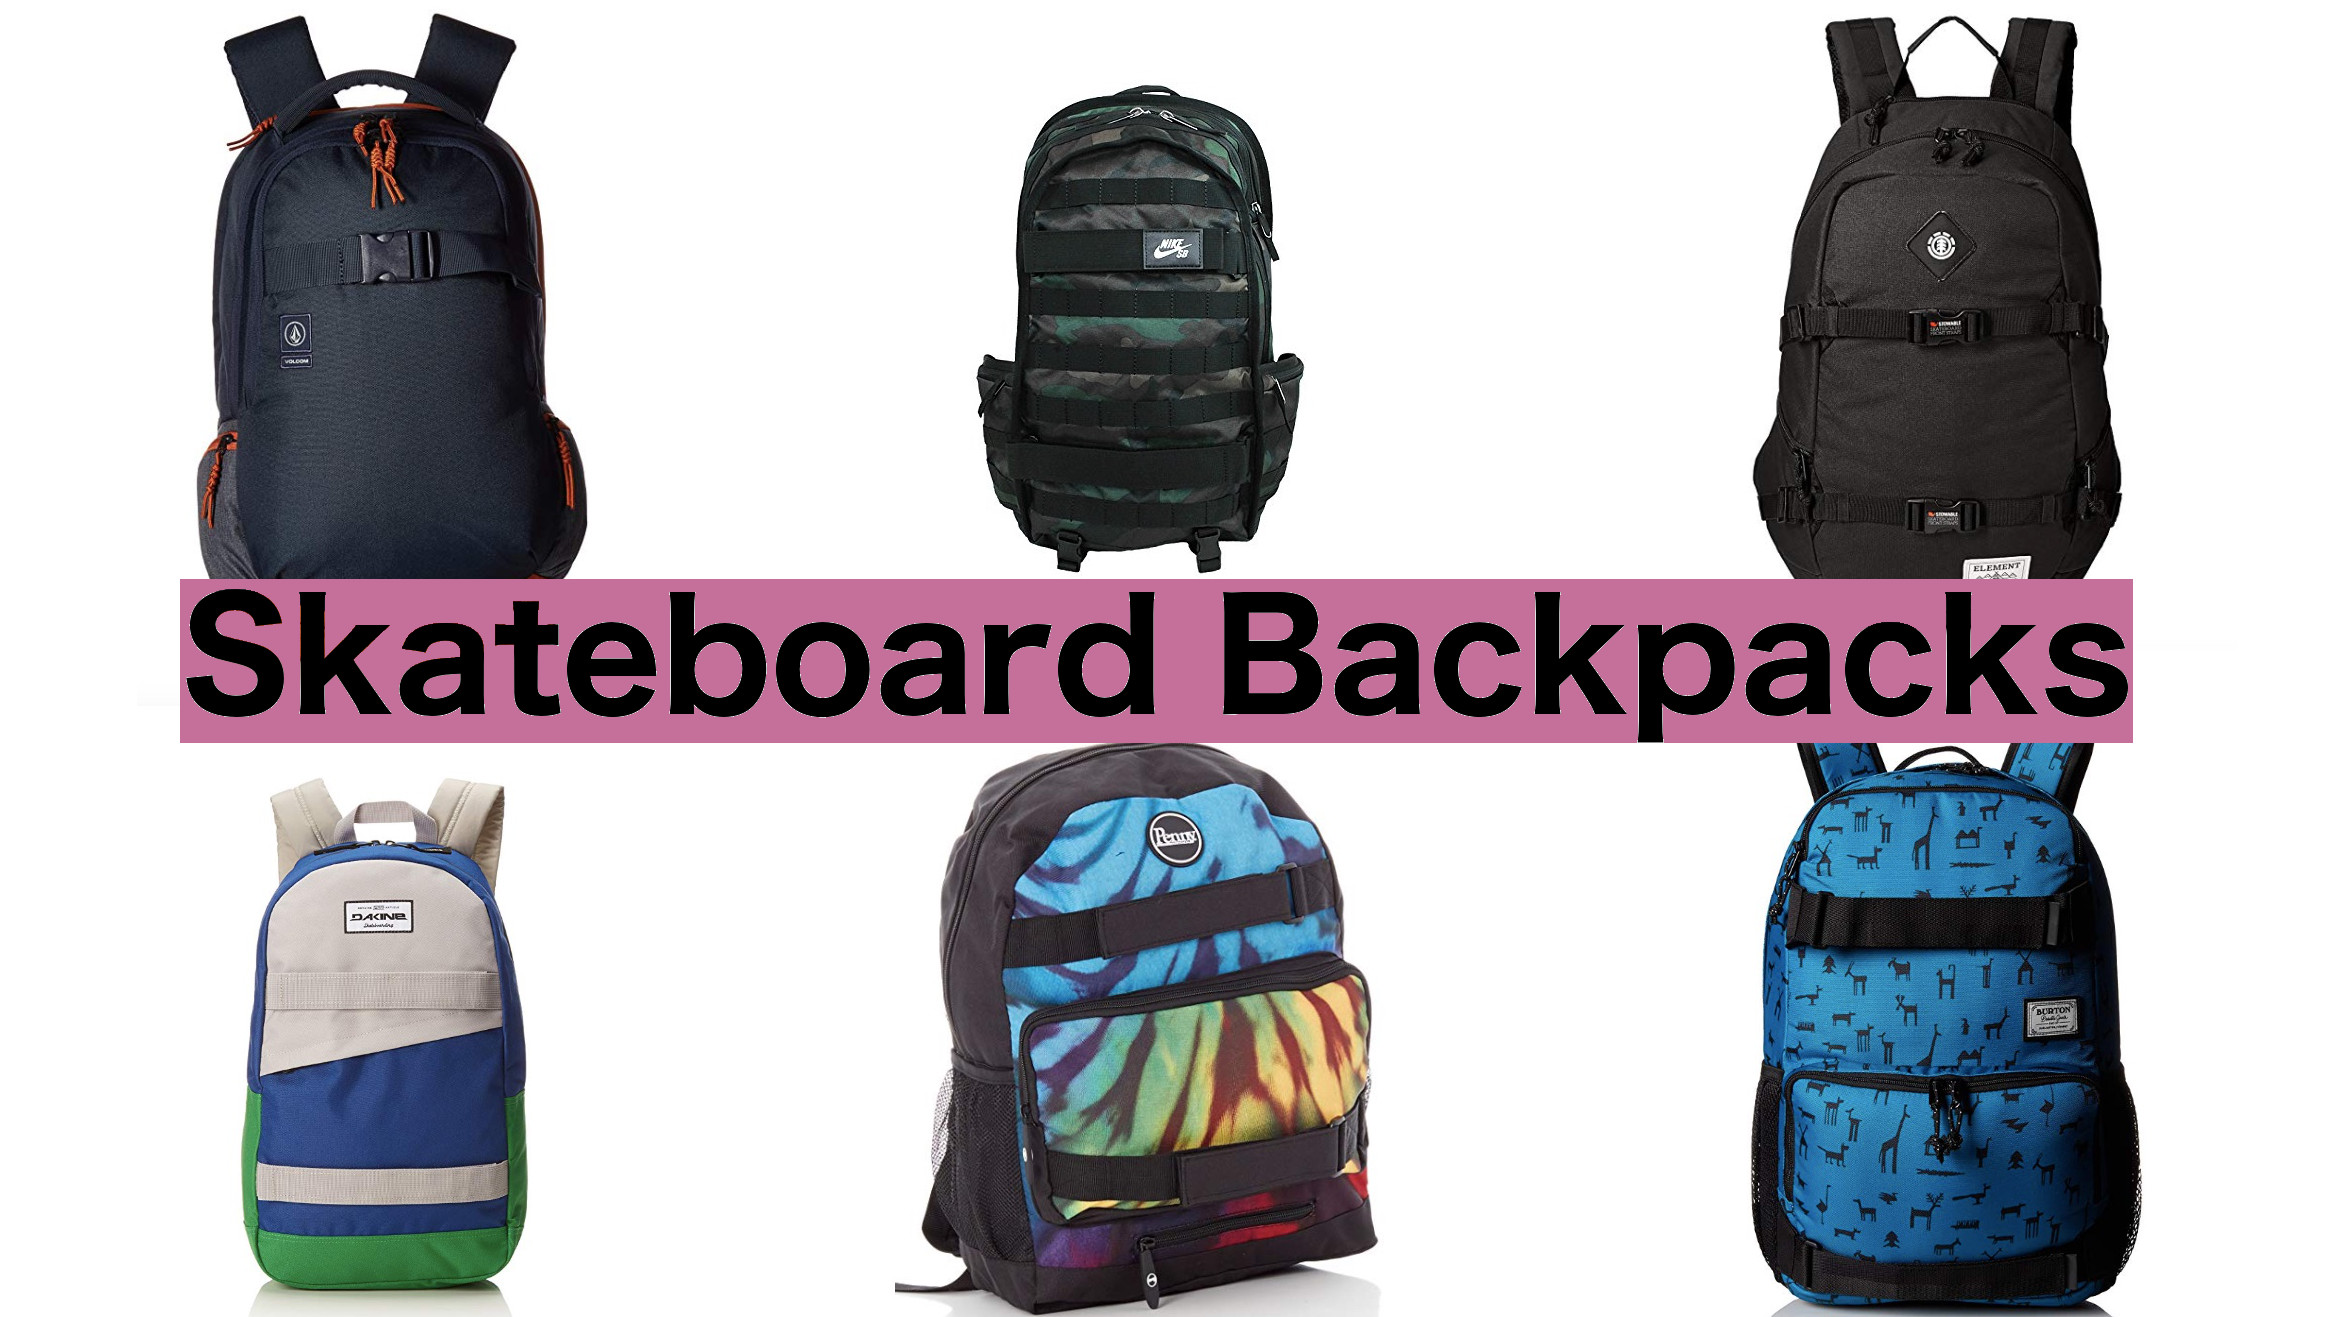 11 Skateboard Backpack Options: Compare & Save